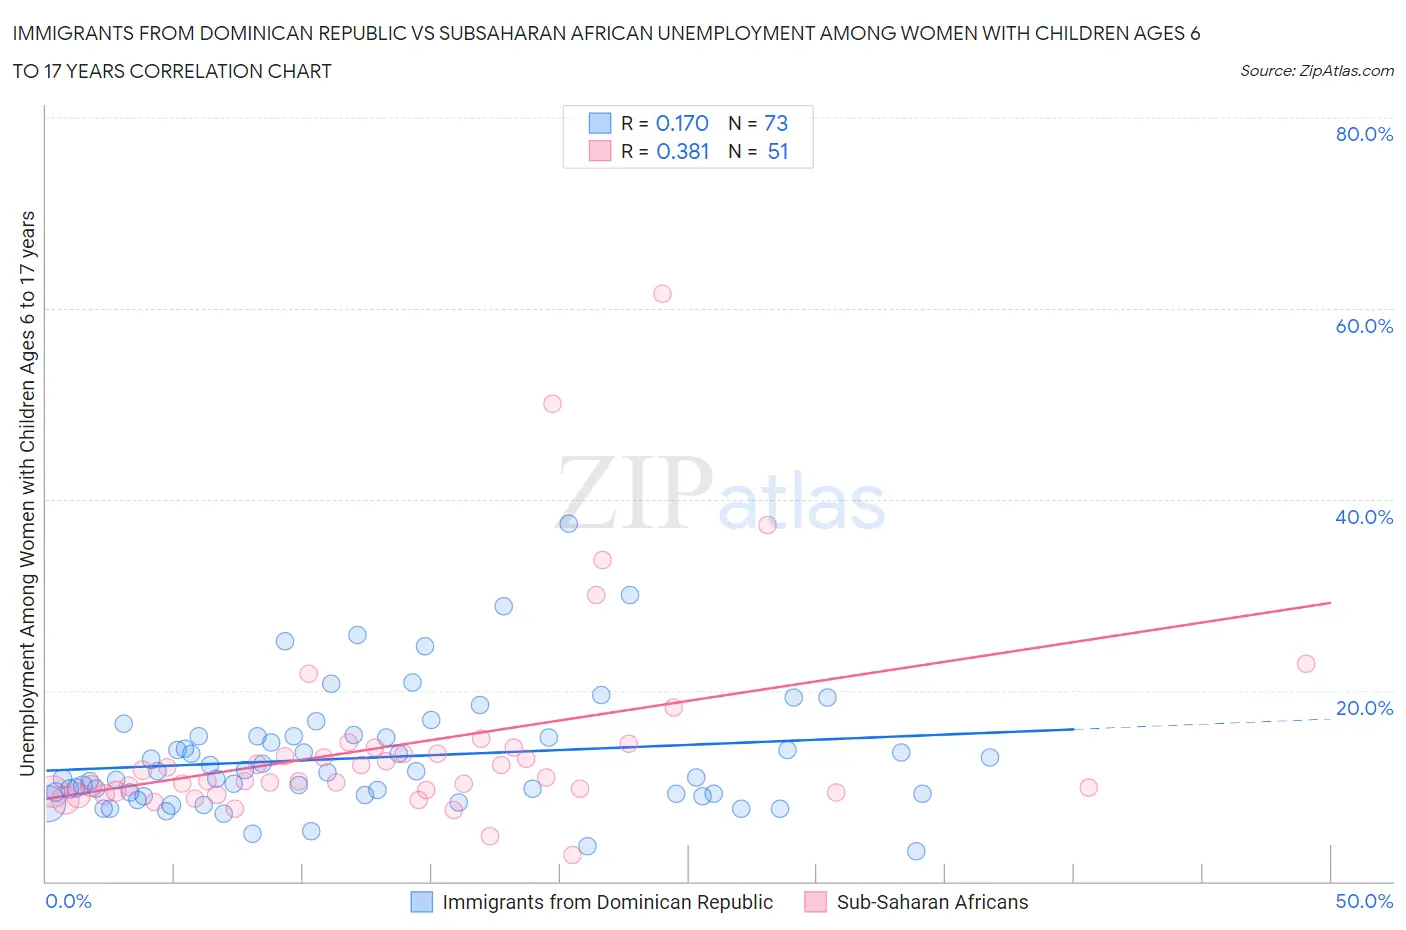 Immigrants from Dominican Republic vs Subsaharan African Unemployment Among Women with Children Ages 6 to 17 years